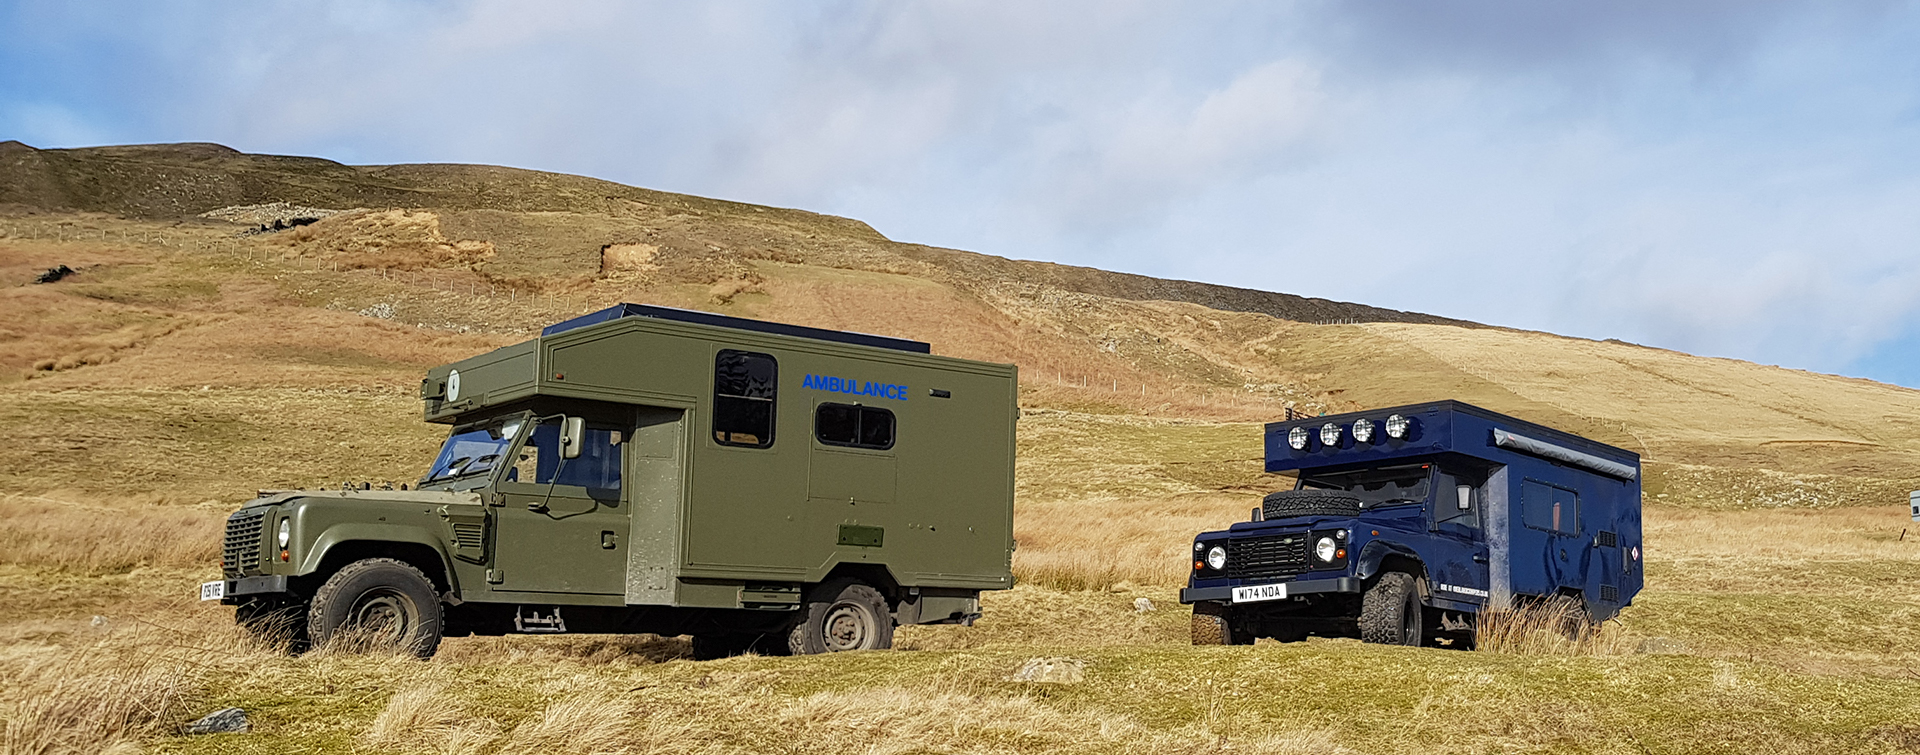 Land Rover Campers